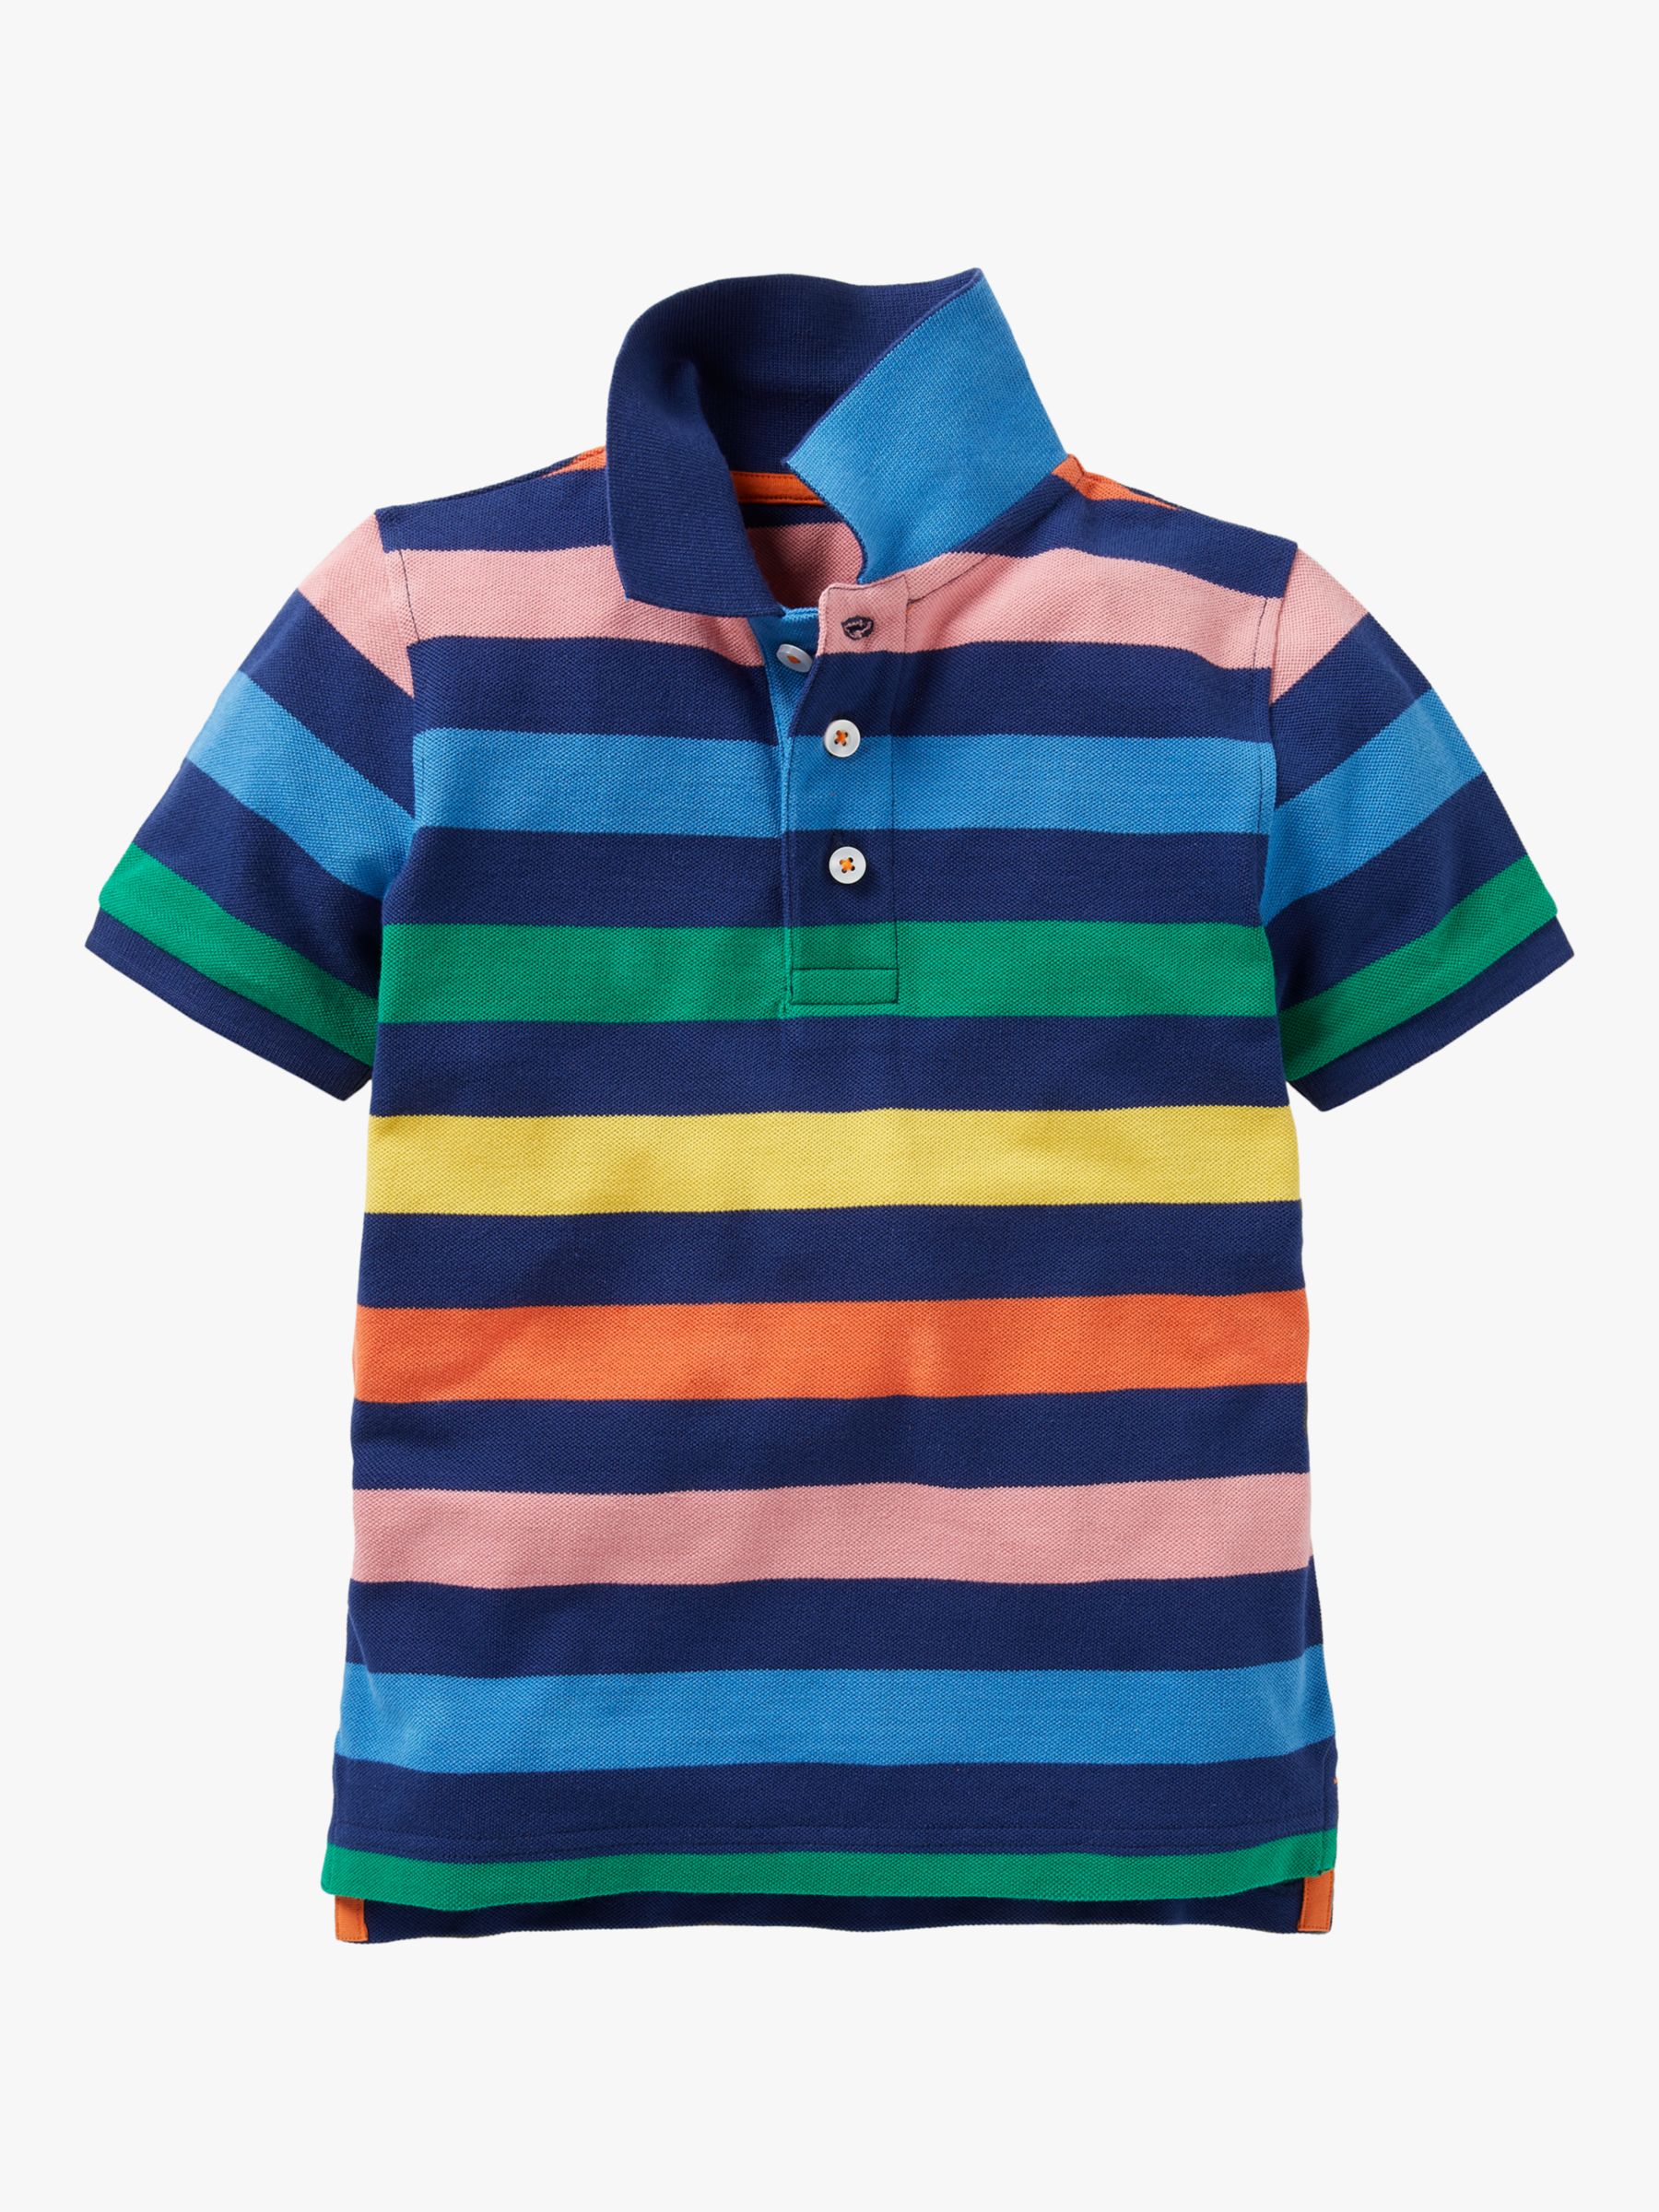 Boys top MINI BODEN polo t-shirt striped age 2 3 4 5 6 7 8 9 10 years  NEW 